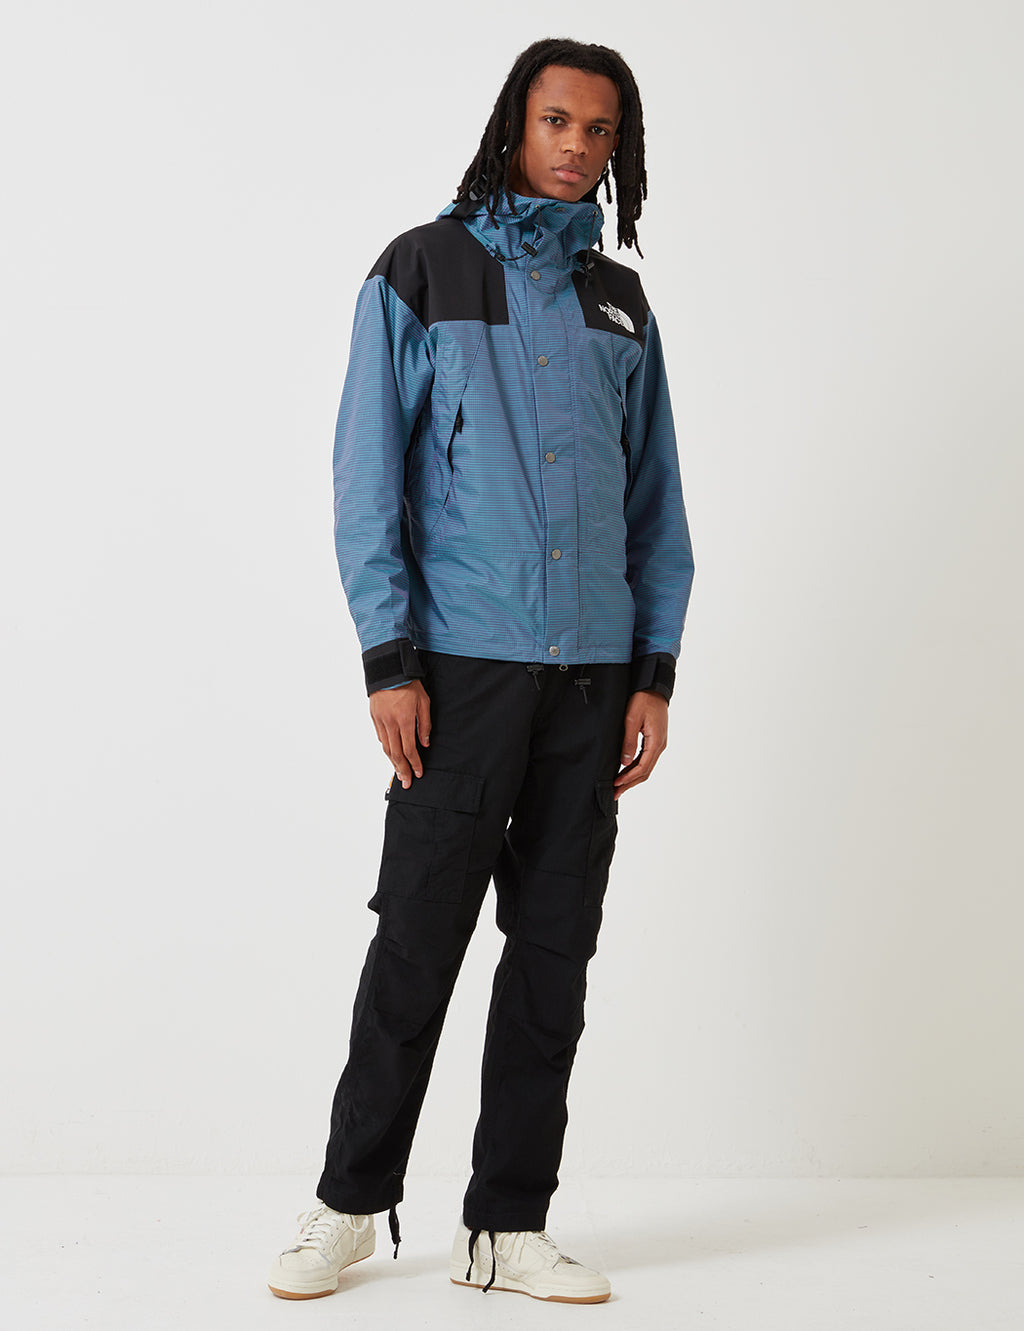 North Face 1990 Mountain Jacket - Iridescent Blue | URBAN EXCESS.